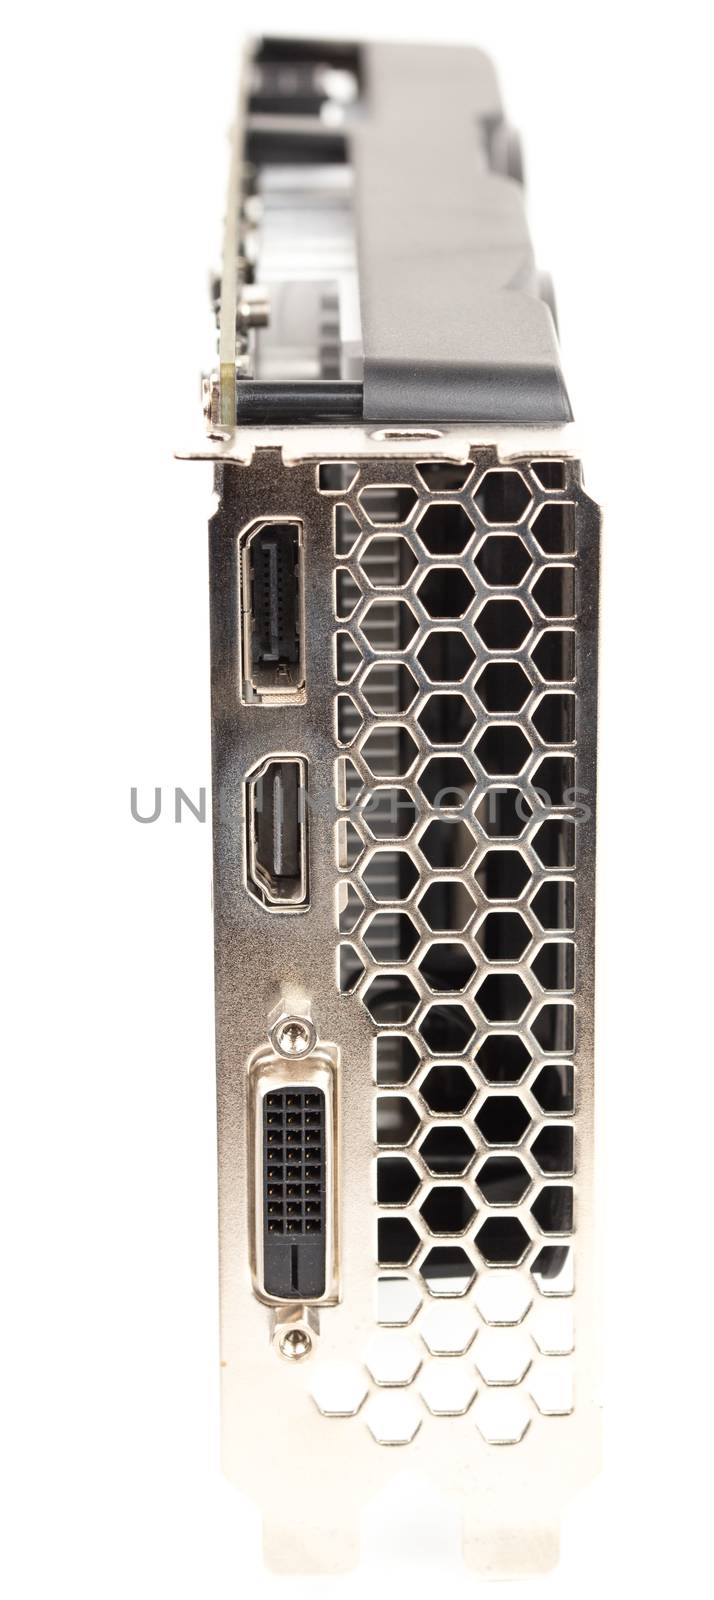 closeup view of modern video card's external connectors with selective focus and isolated on white background by z1b